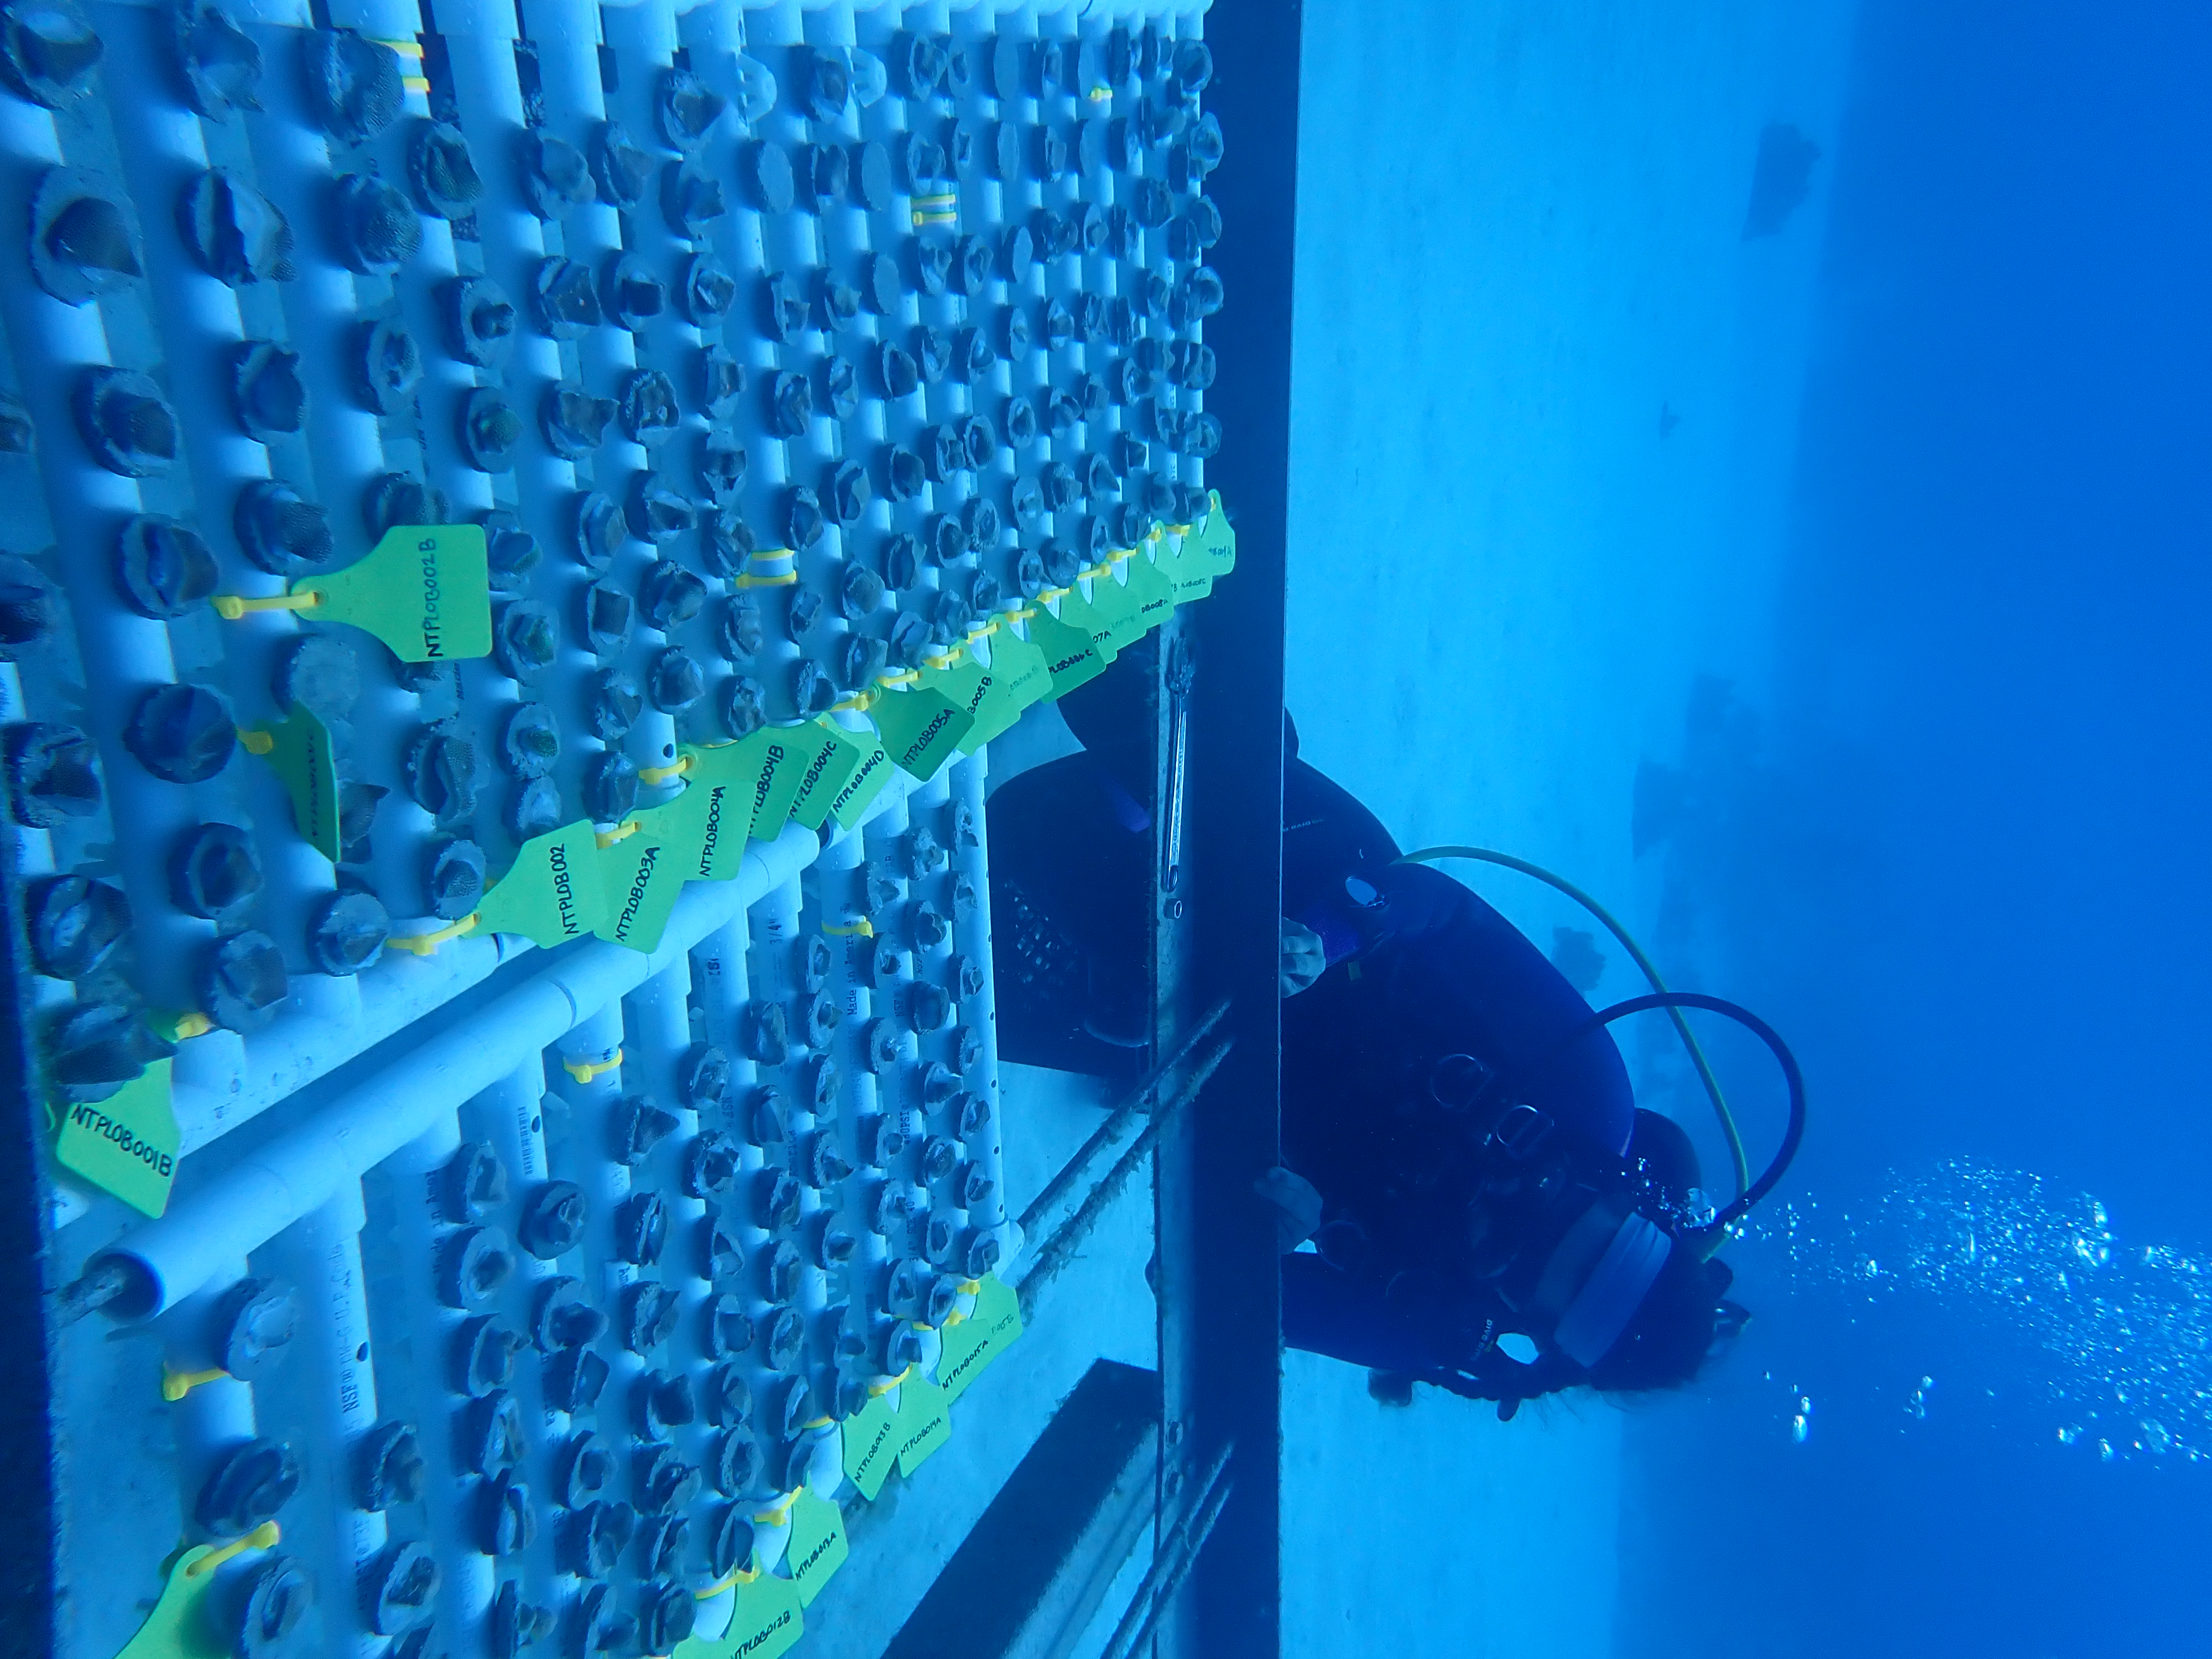 A scuba diver monitoring the growth of rows of coral cuttings sitting on a nursery table on the sandy seafloor.